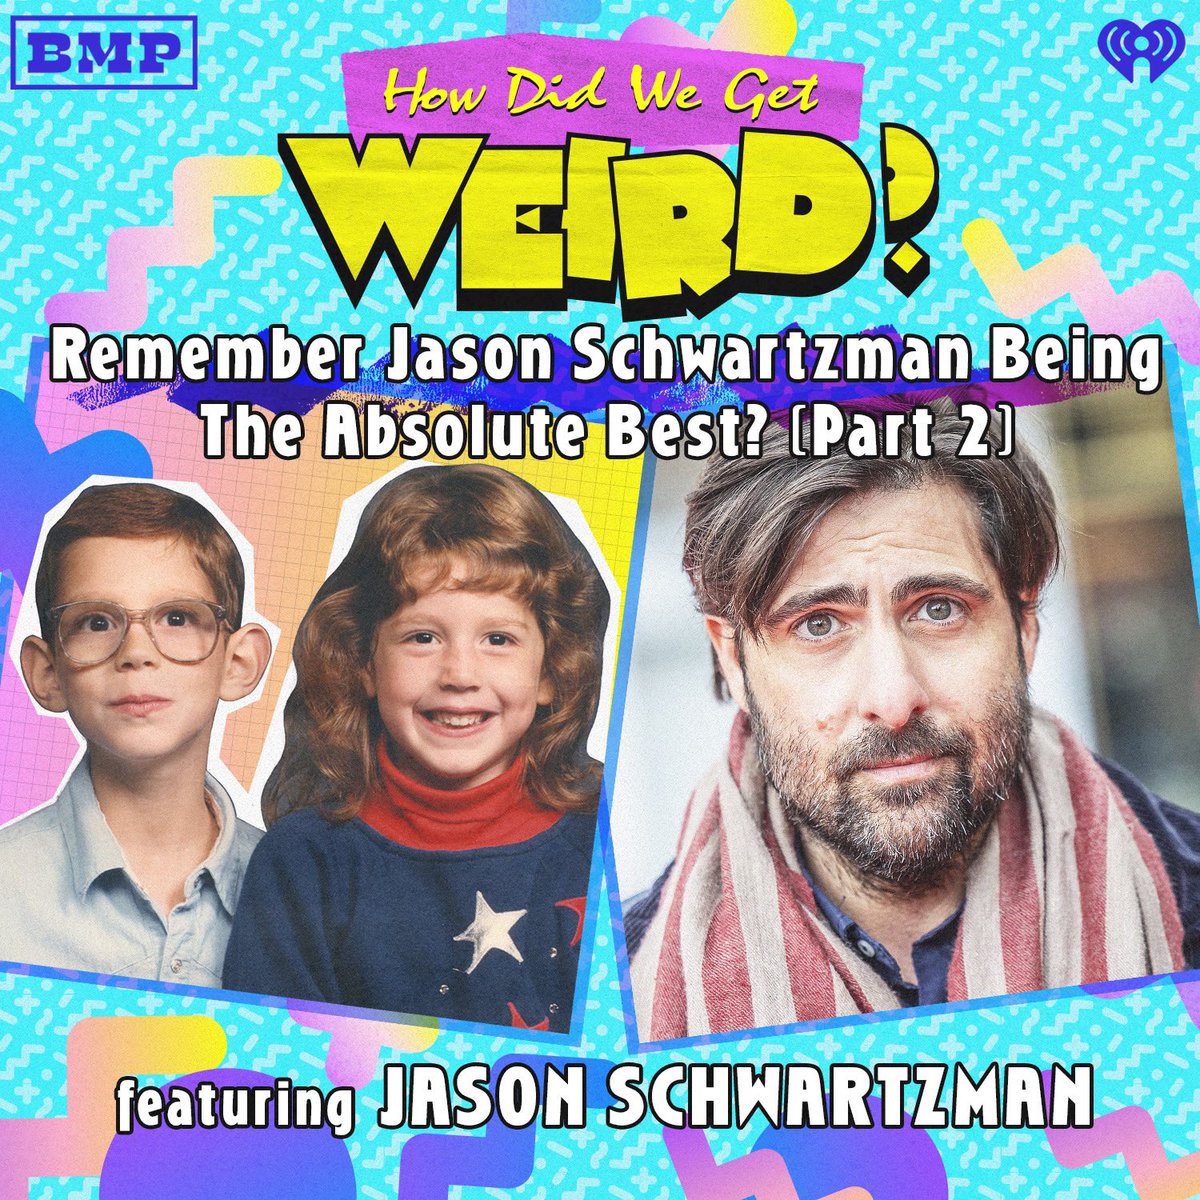 On today’s new ep @jonahmbayer and I are thrilled to share Part 2 of our epic convo with Jason Schwartzman! Not only do we all do our best Kermit impressions, but we talk about going through our parents basements, Jason shows of the Easy button he got from Staples and more!!